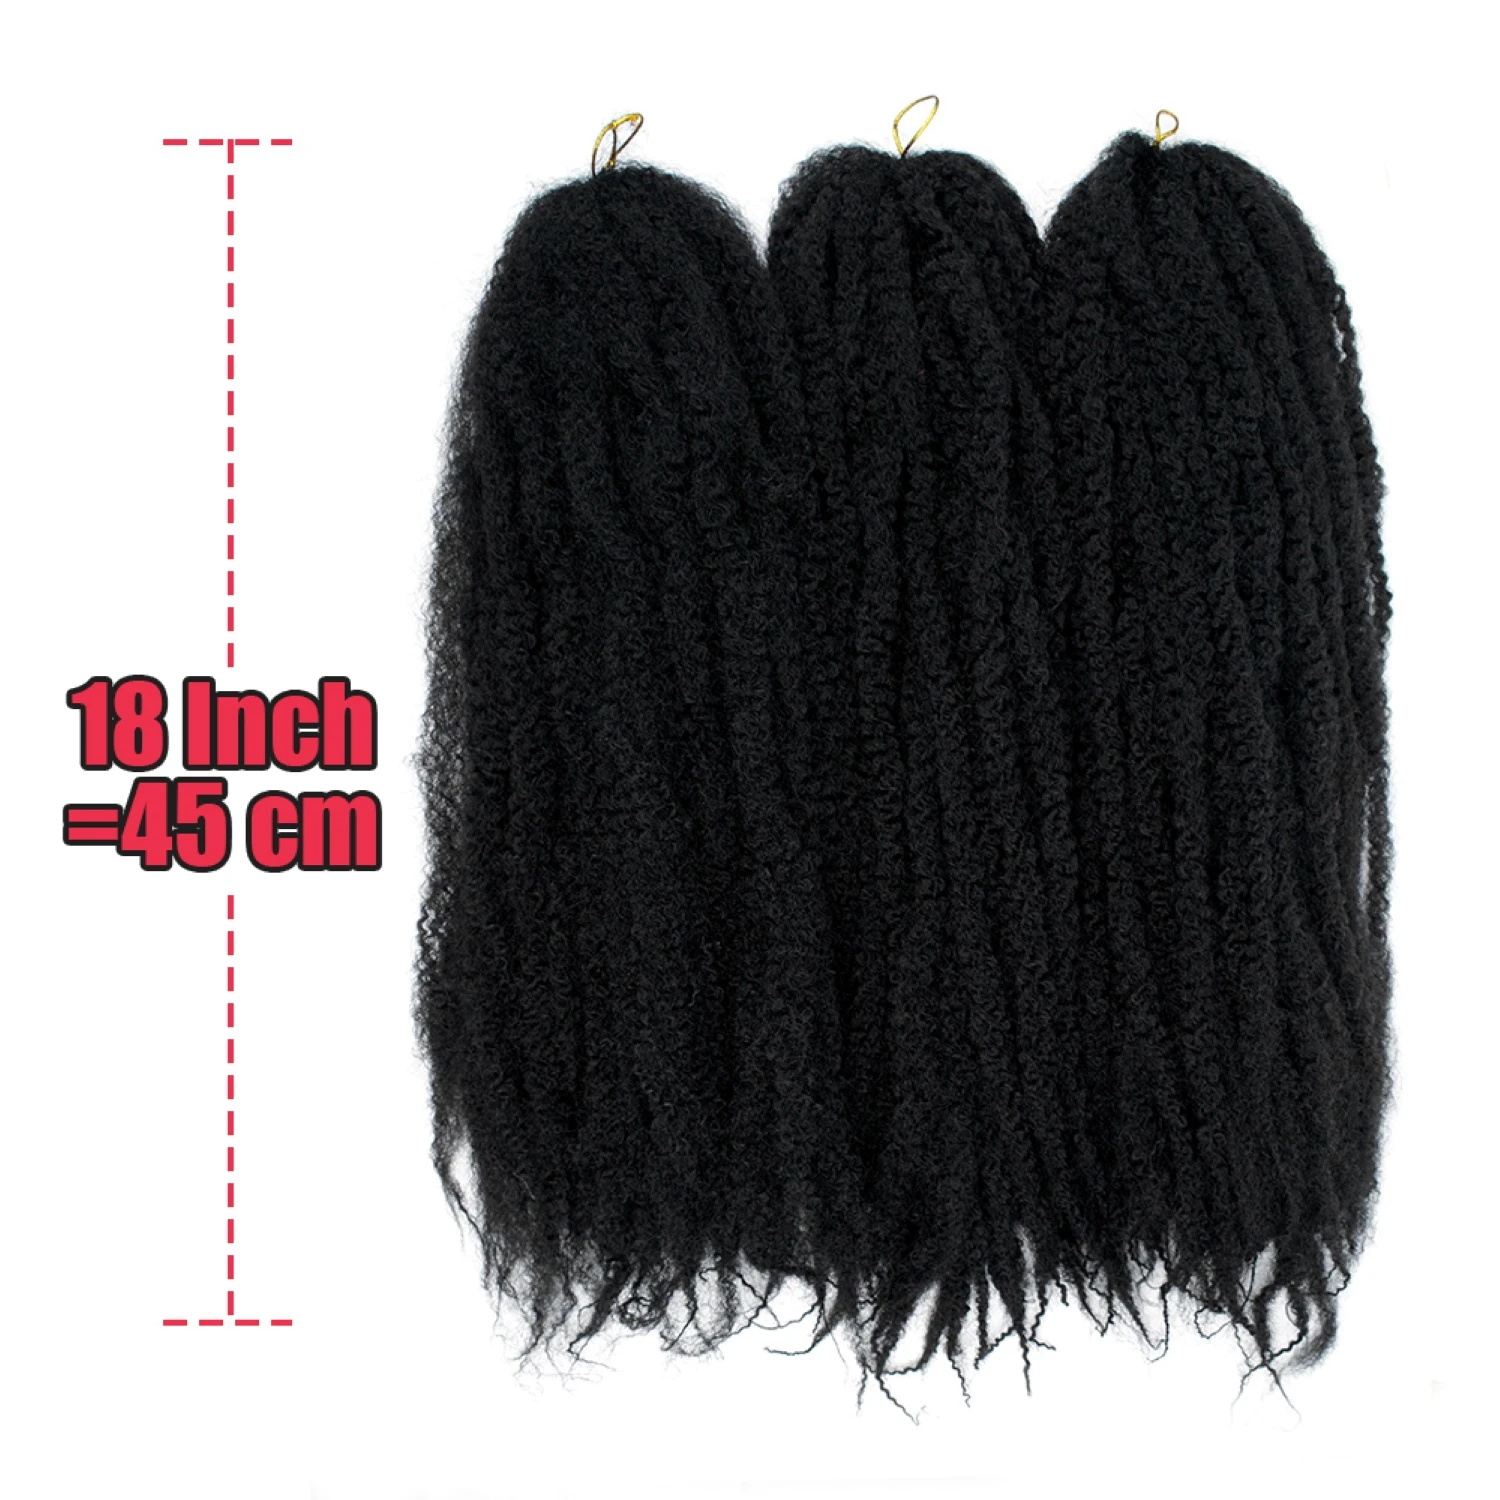 

Marley Twist Braiding Hair 18 Inch Long Crochet Braids Afro Kinky Synthetic Hair For Twists Braiding Extensions